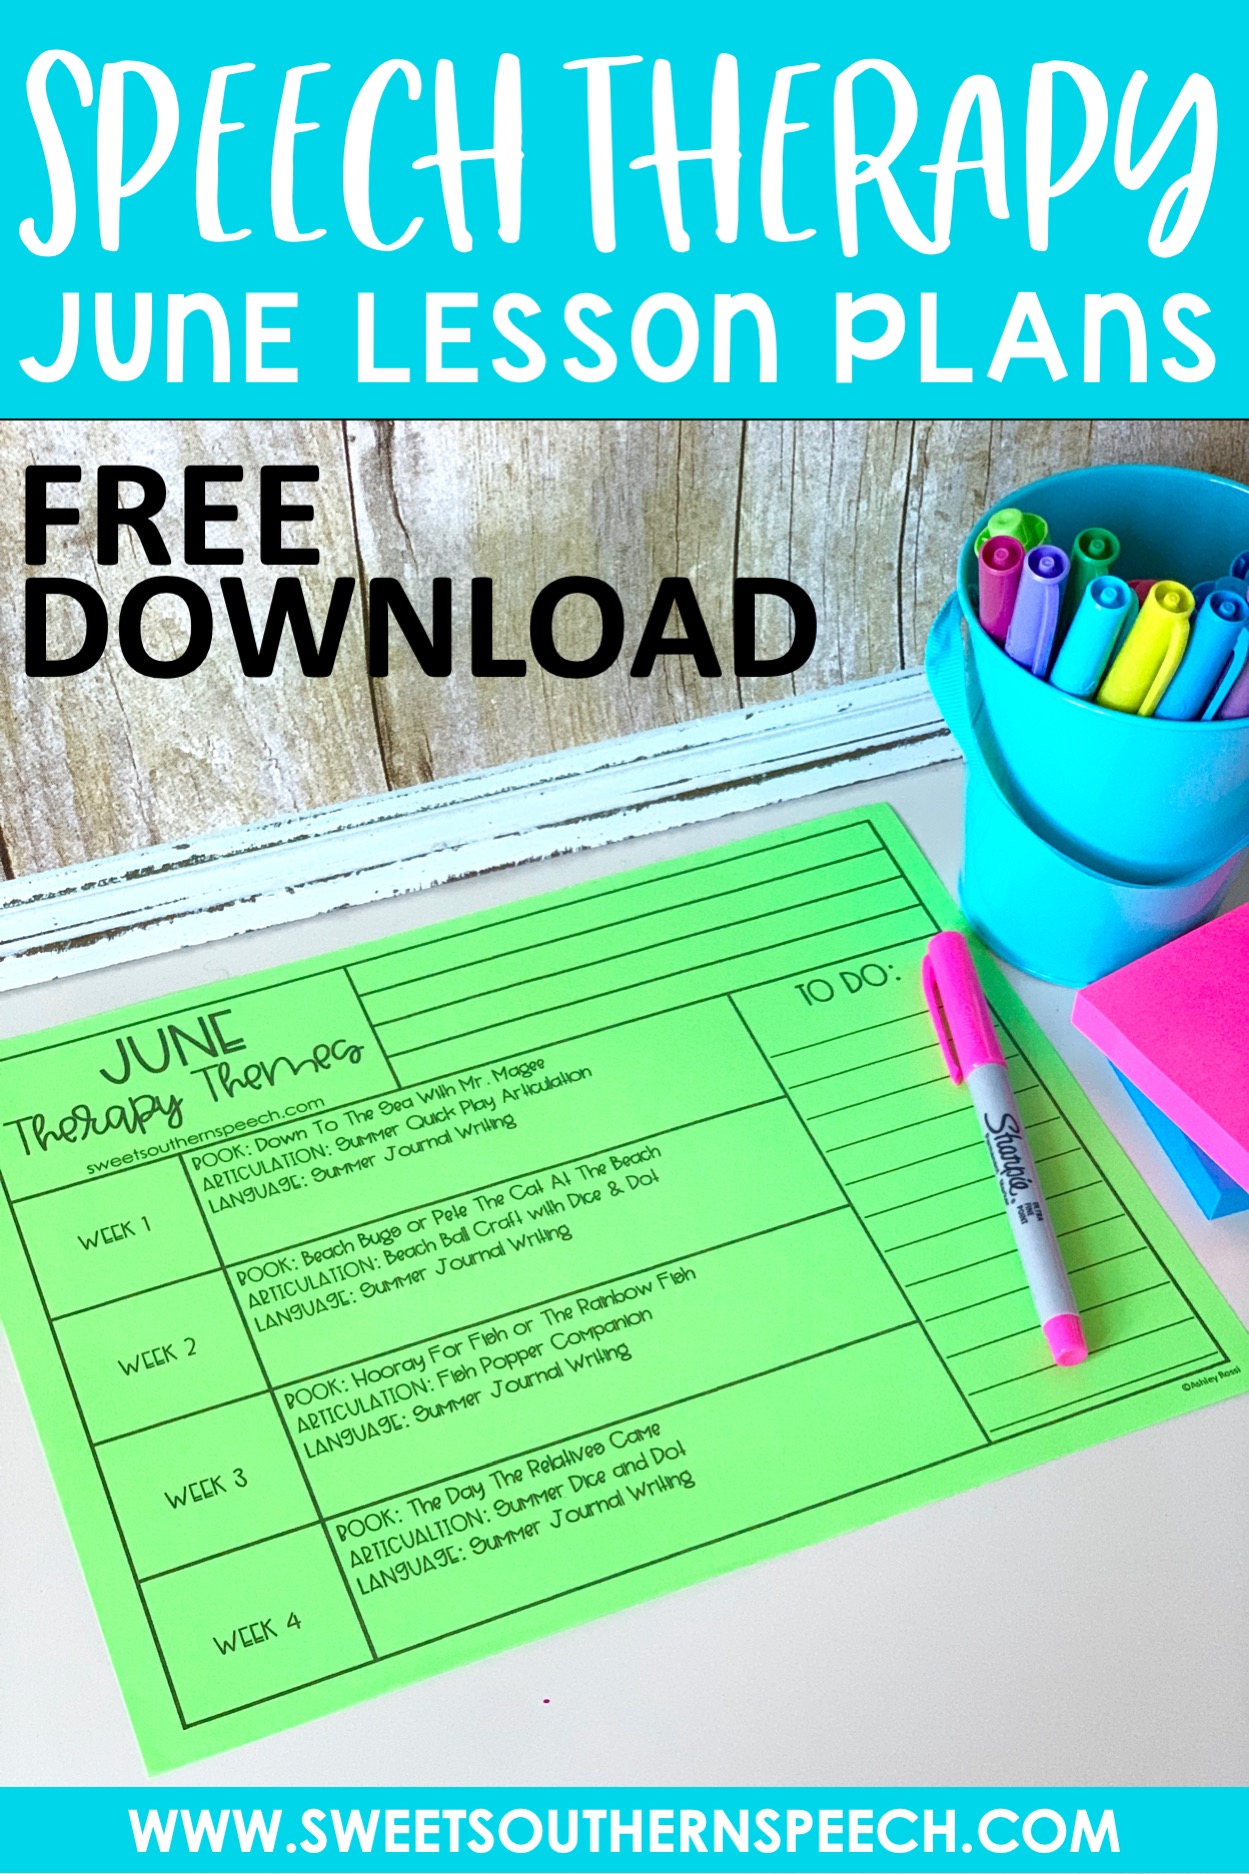 FREE DOWNLOAD - get the June Speech Therapy Lesson plans for fun summer activities!